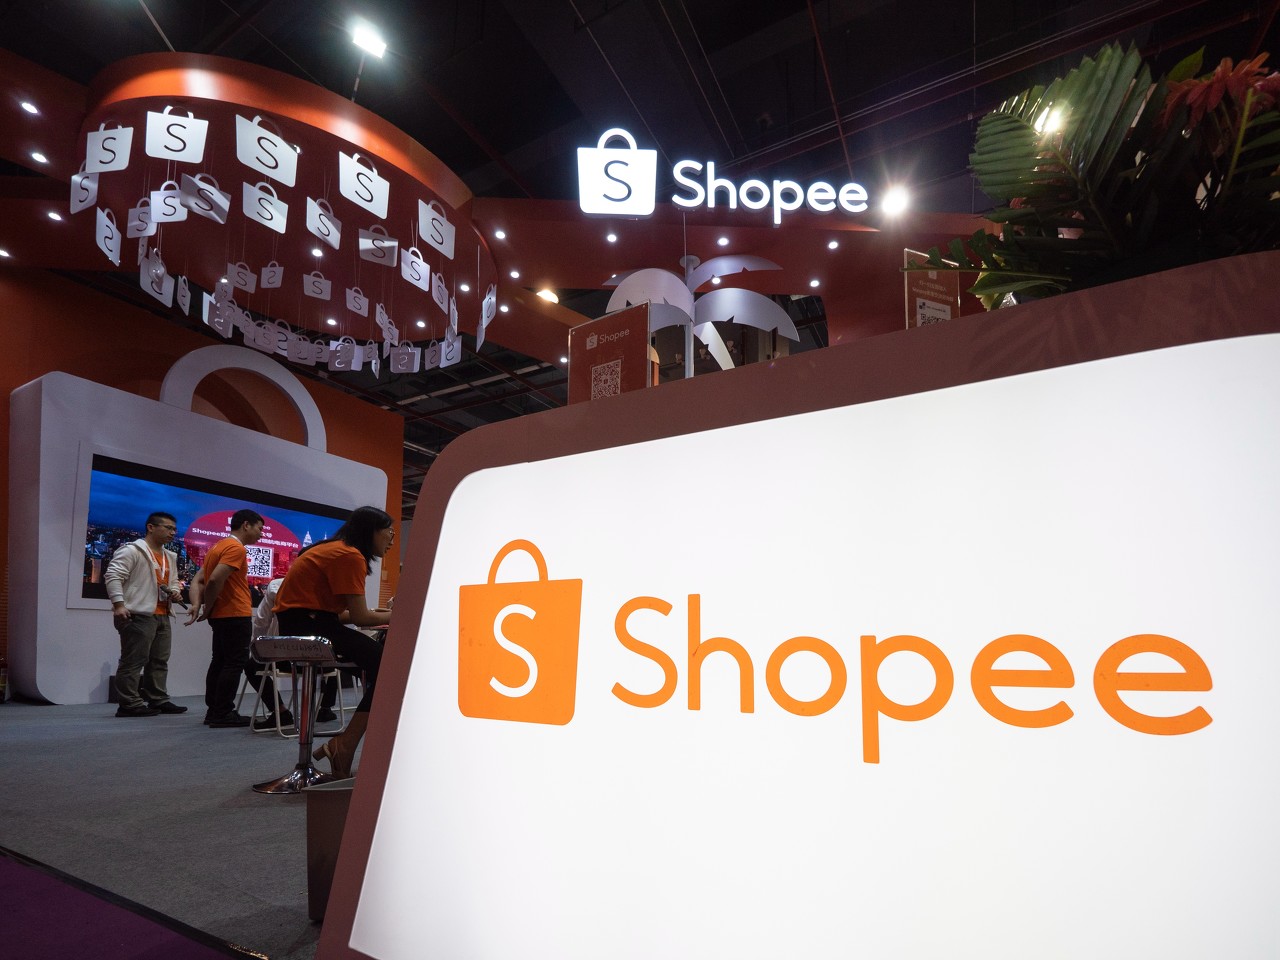 Shopee under investigation after K-pop promotion campaign goes wrong in the Philippines